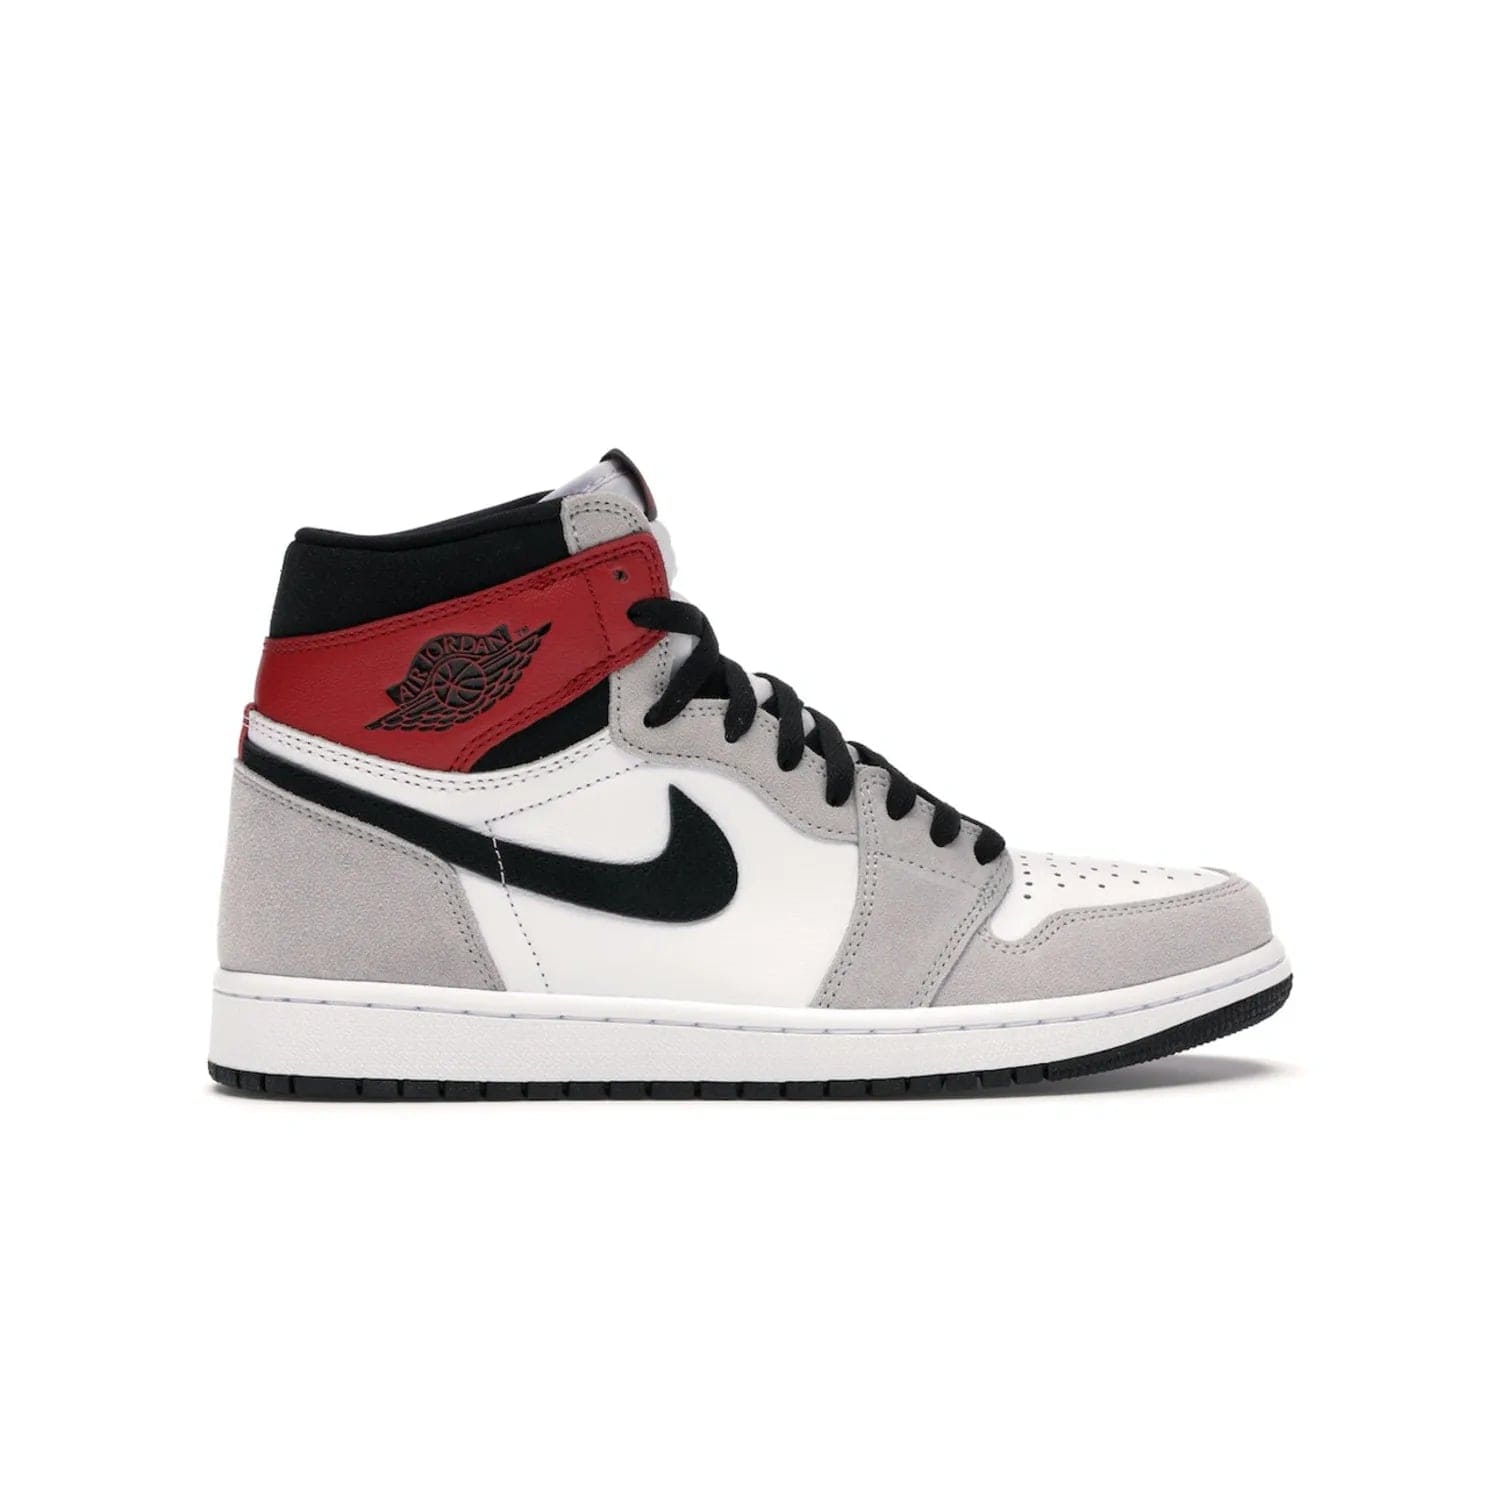 Jordan 1 Retro High Light Smoke Grey - Image 36 - Only at www.BallersClubKickz.com - Comfortable and stylish, Jordan 1 Retro High Light Smoke Grey offers a unique spin on a classic design. White leather, grey suede, red leather and black details are set on a white midsole and black outsole. Get the sneaker released in July 2020 and add a twist to your wardrobe.